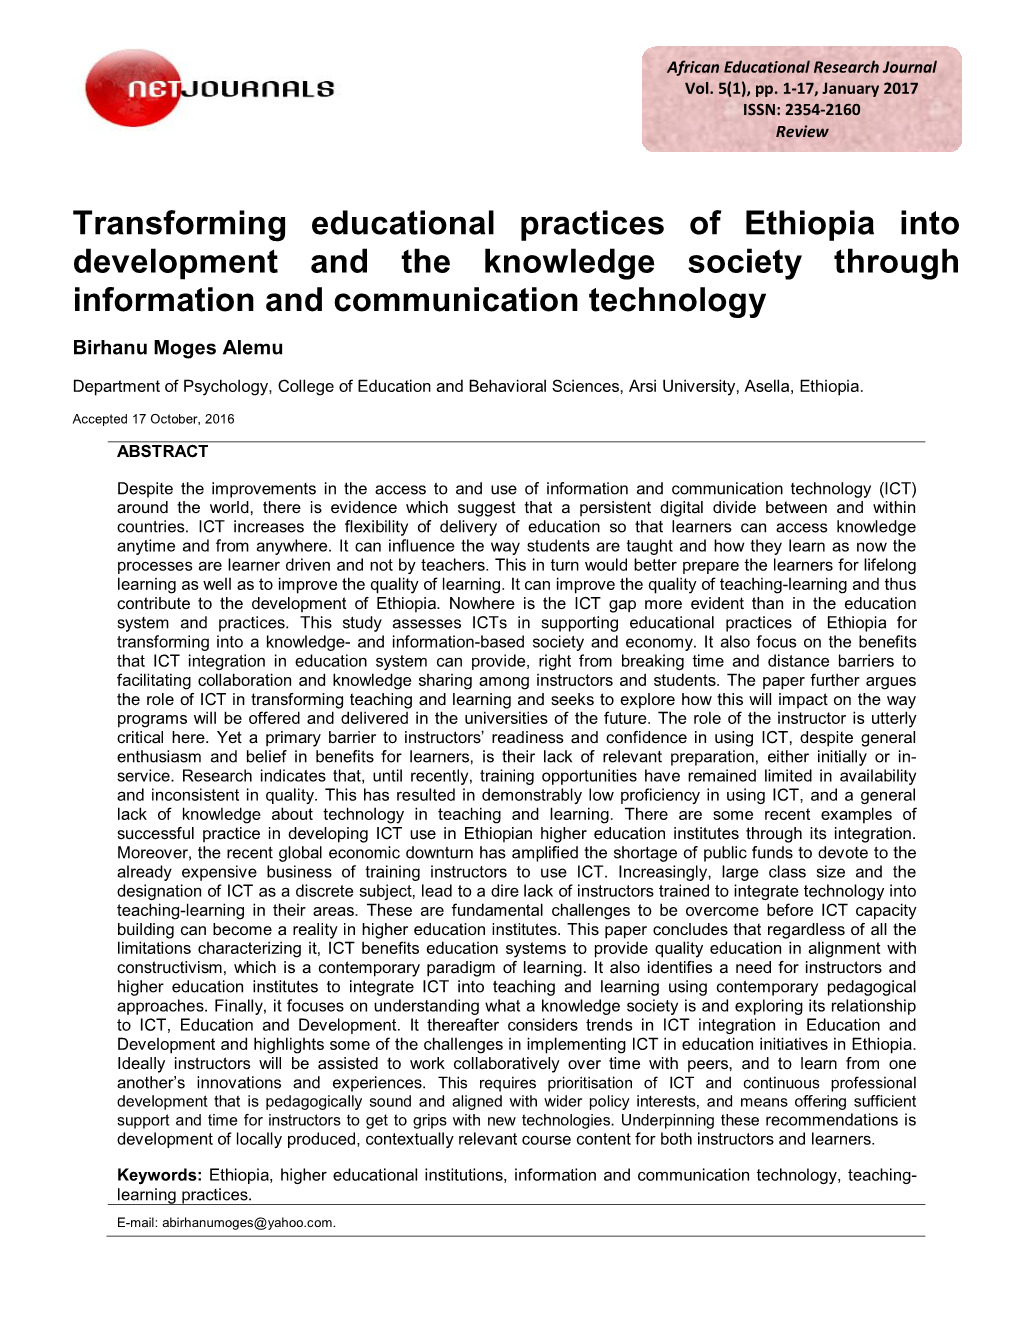 Transforming Educational Practices of Ethiopia Into Development and the Knowledge Society Through Information and Communication Technology